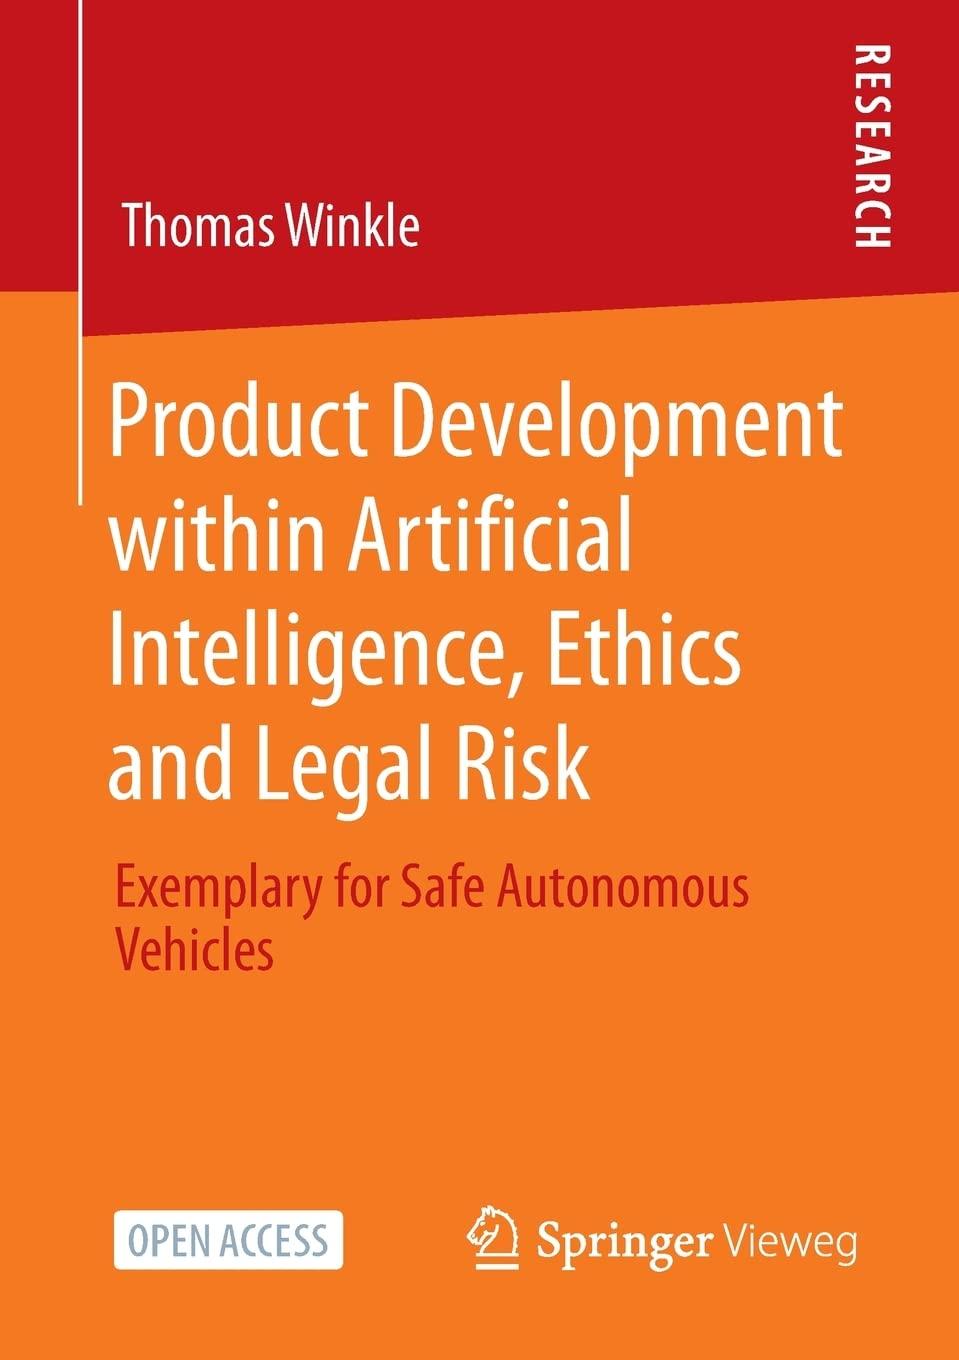 product development within artificial intelligence  ethics and legal risk  exemplary for safe autonomous